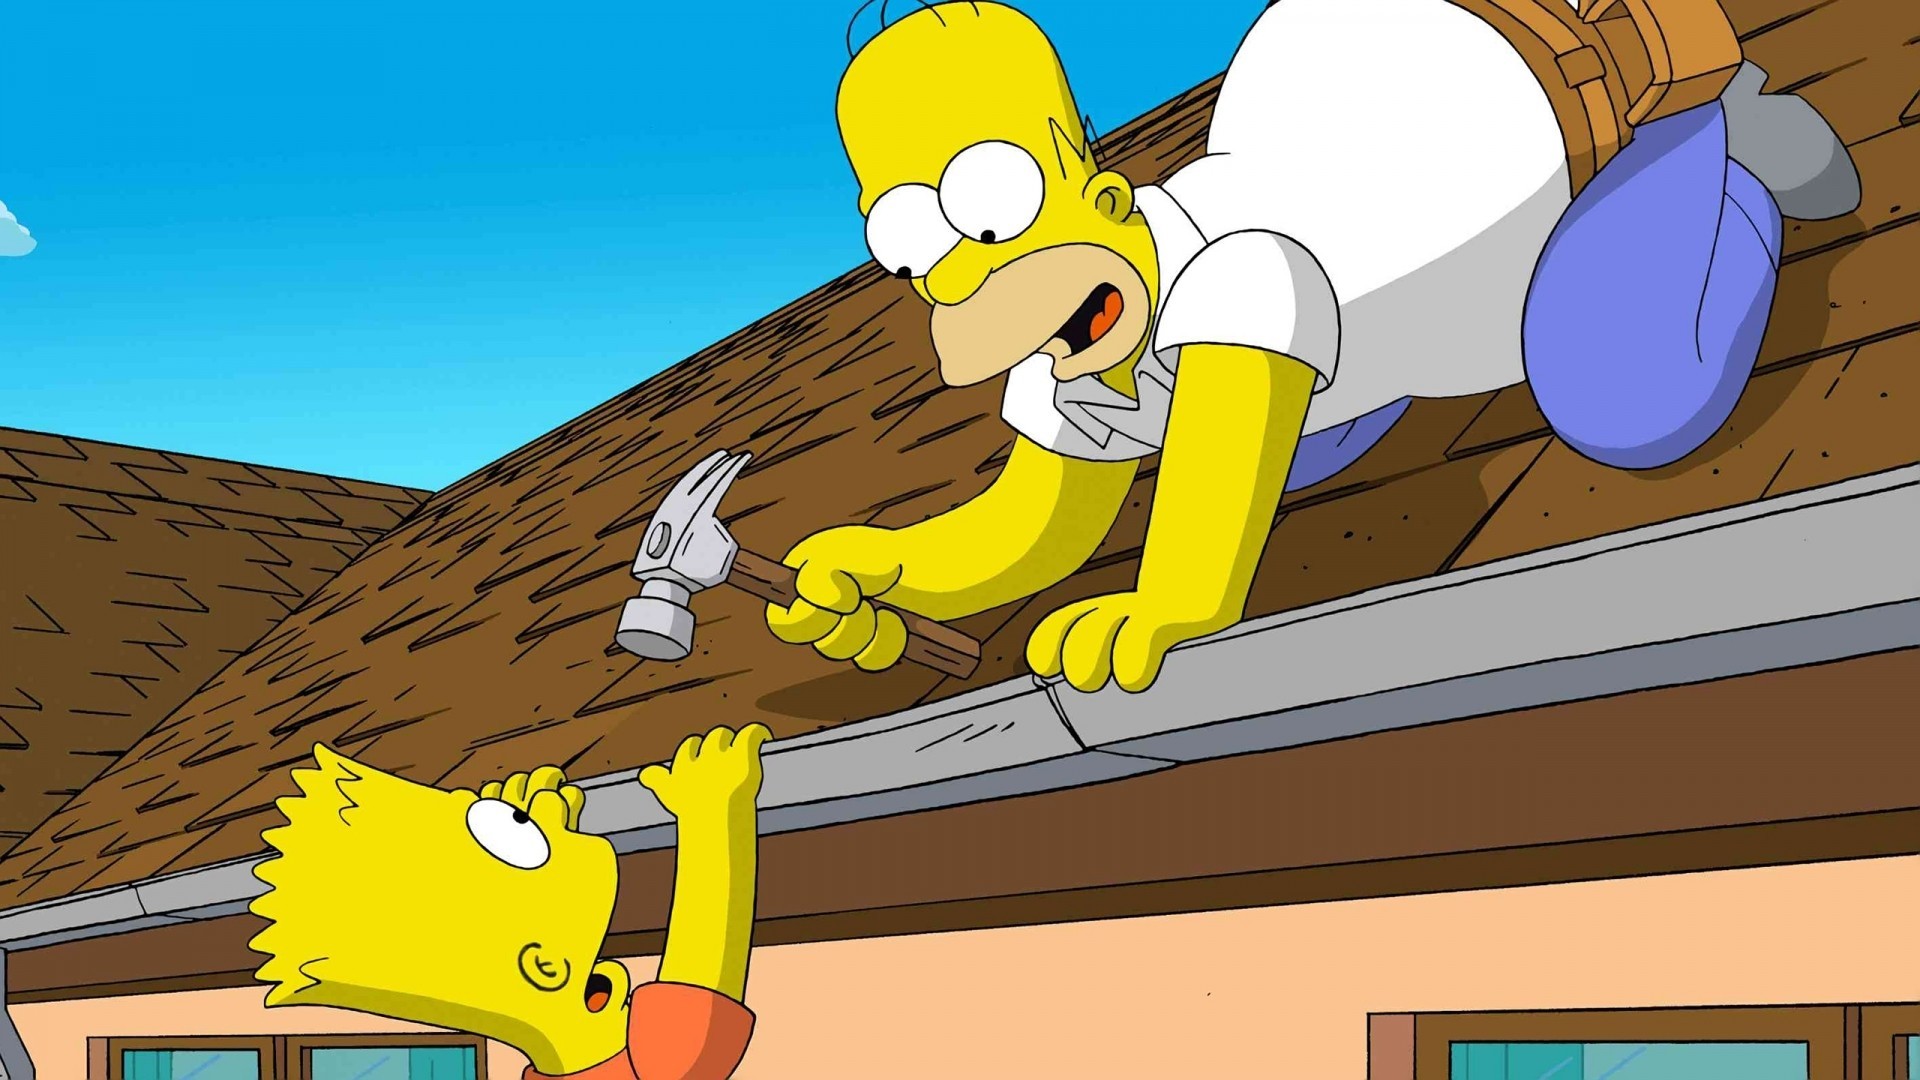 General 1920x1080 animated movies The Simpsons hammer Homer Simpson Bart Simpson movies The Simpsons Movie